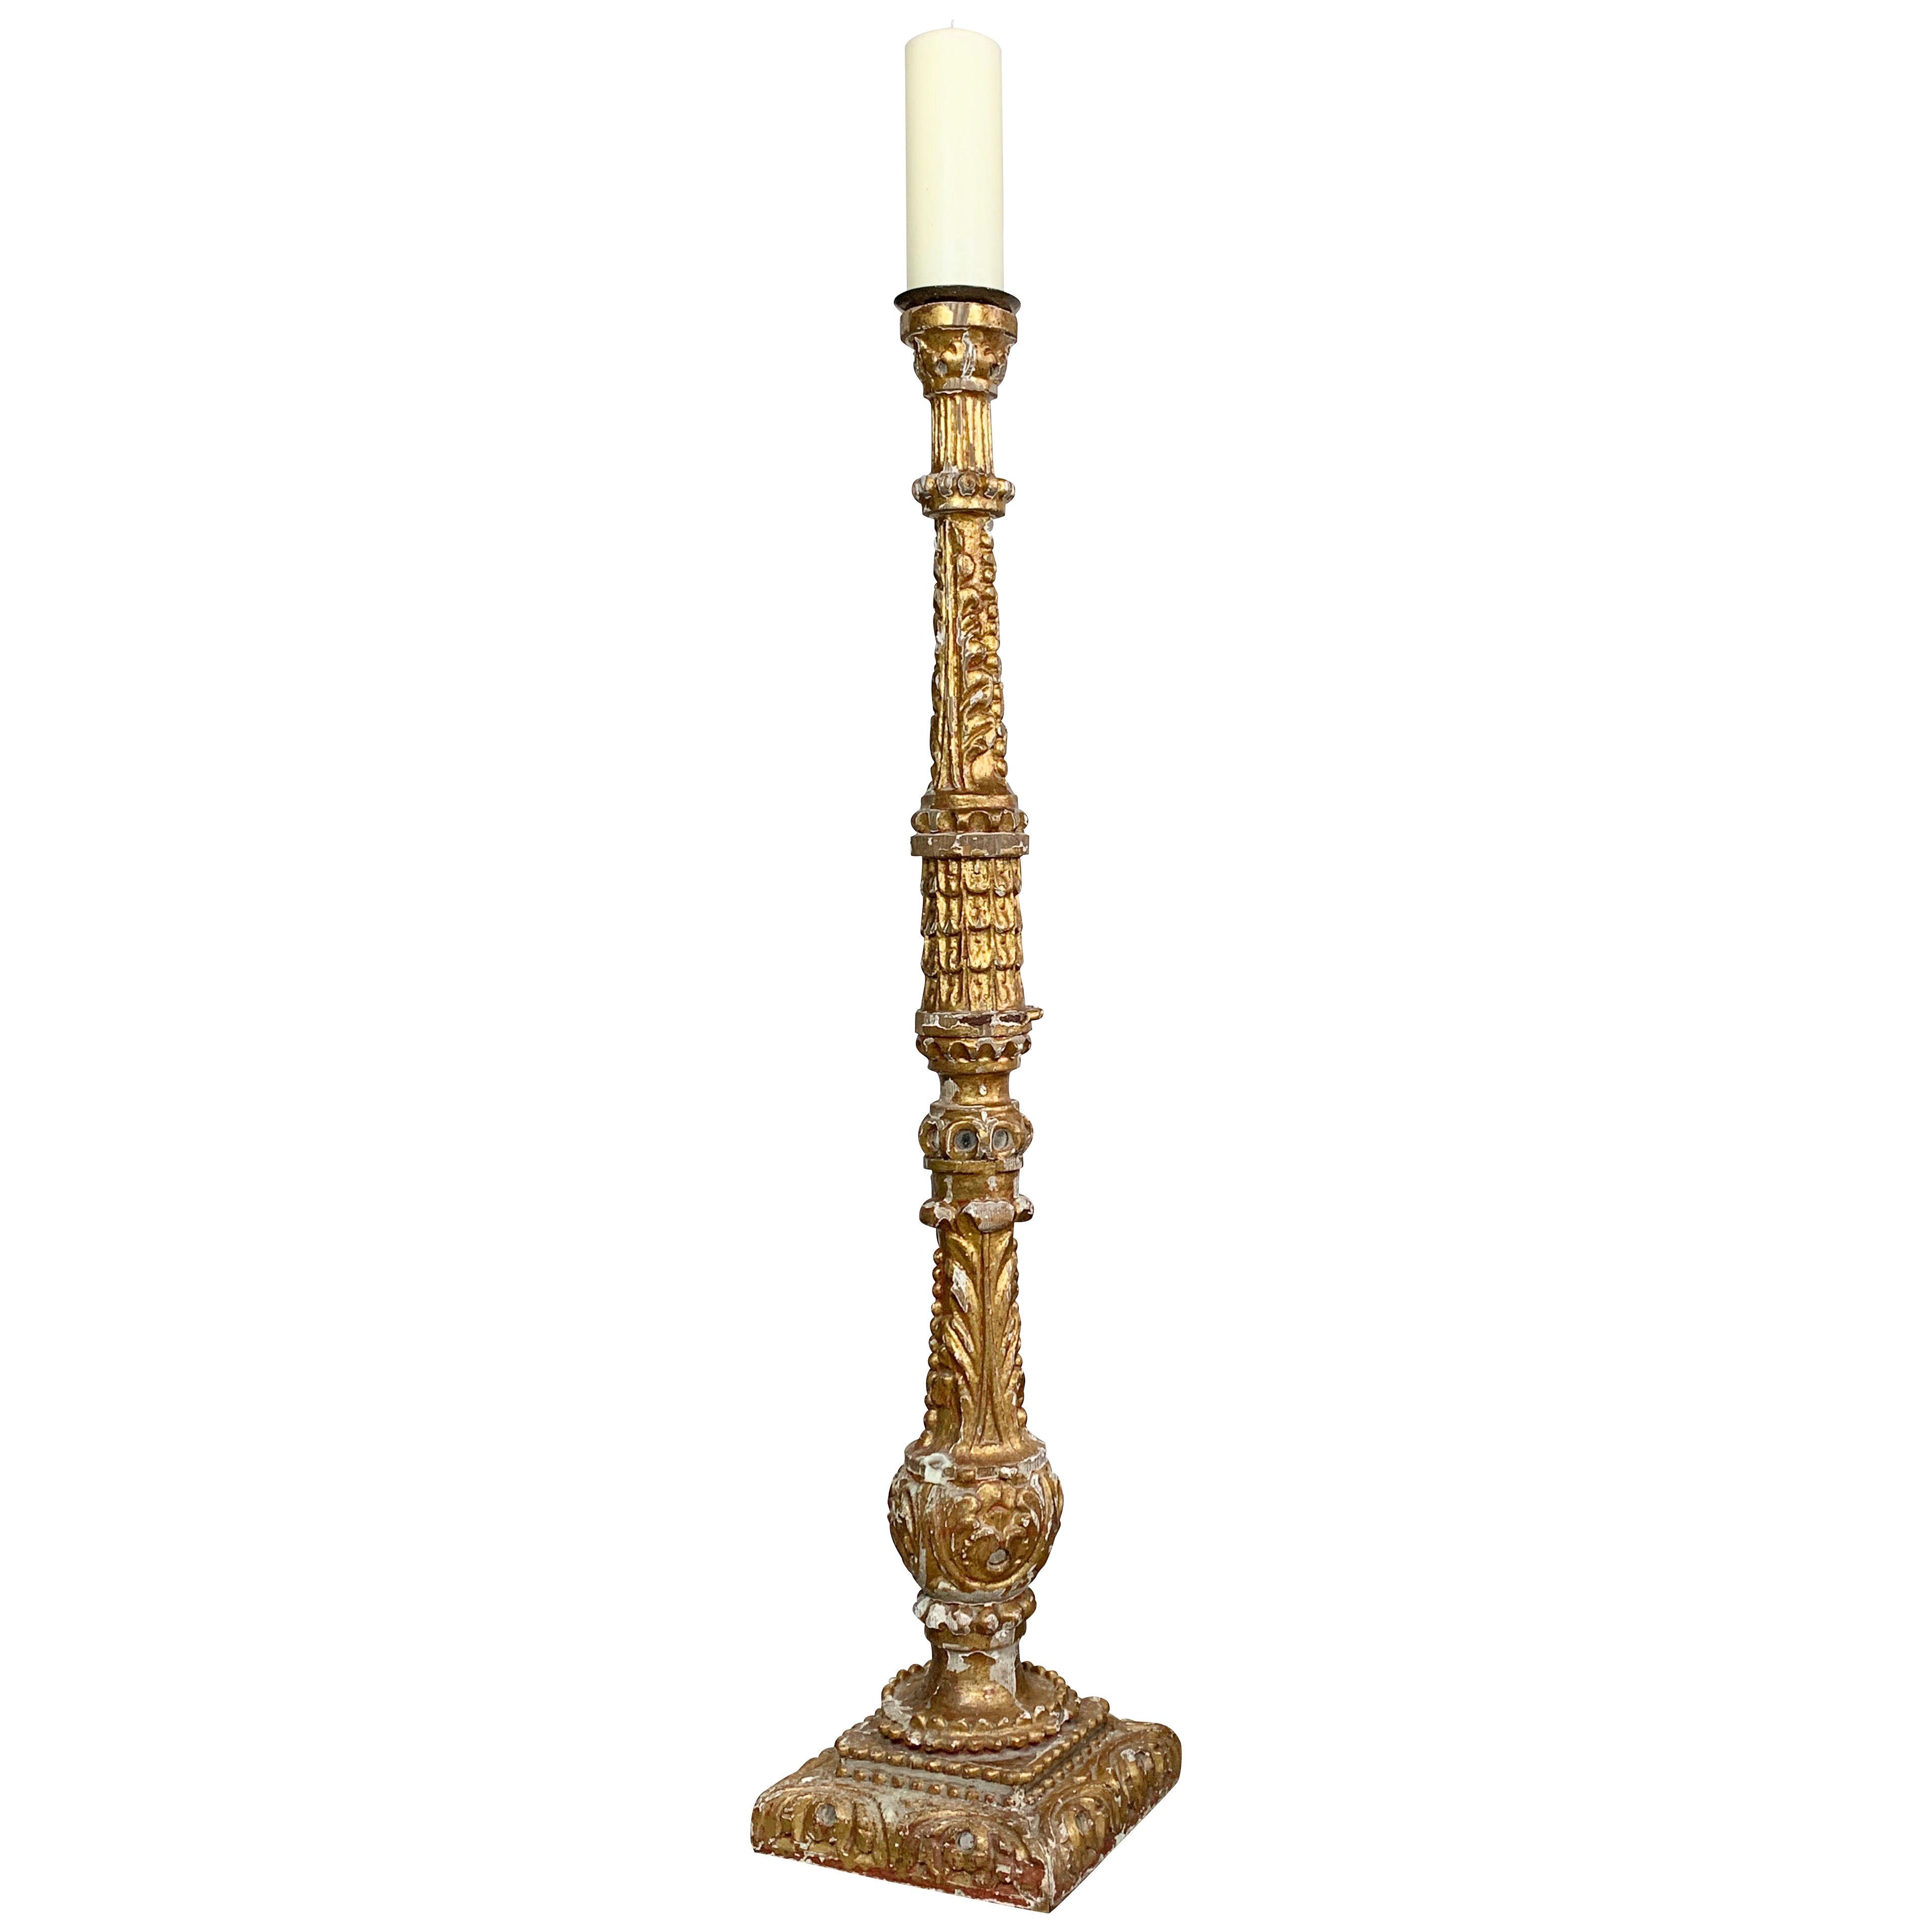 18th Century Tall Baroque Altar Pricket Candlestick